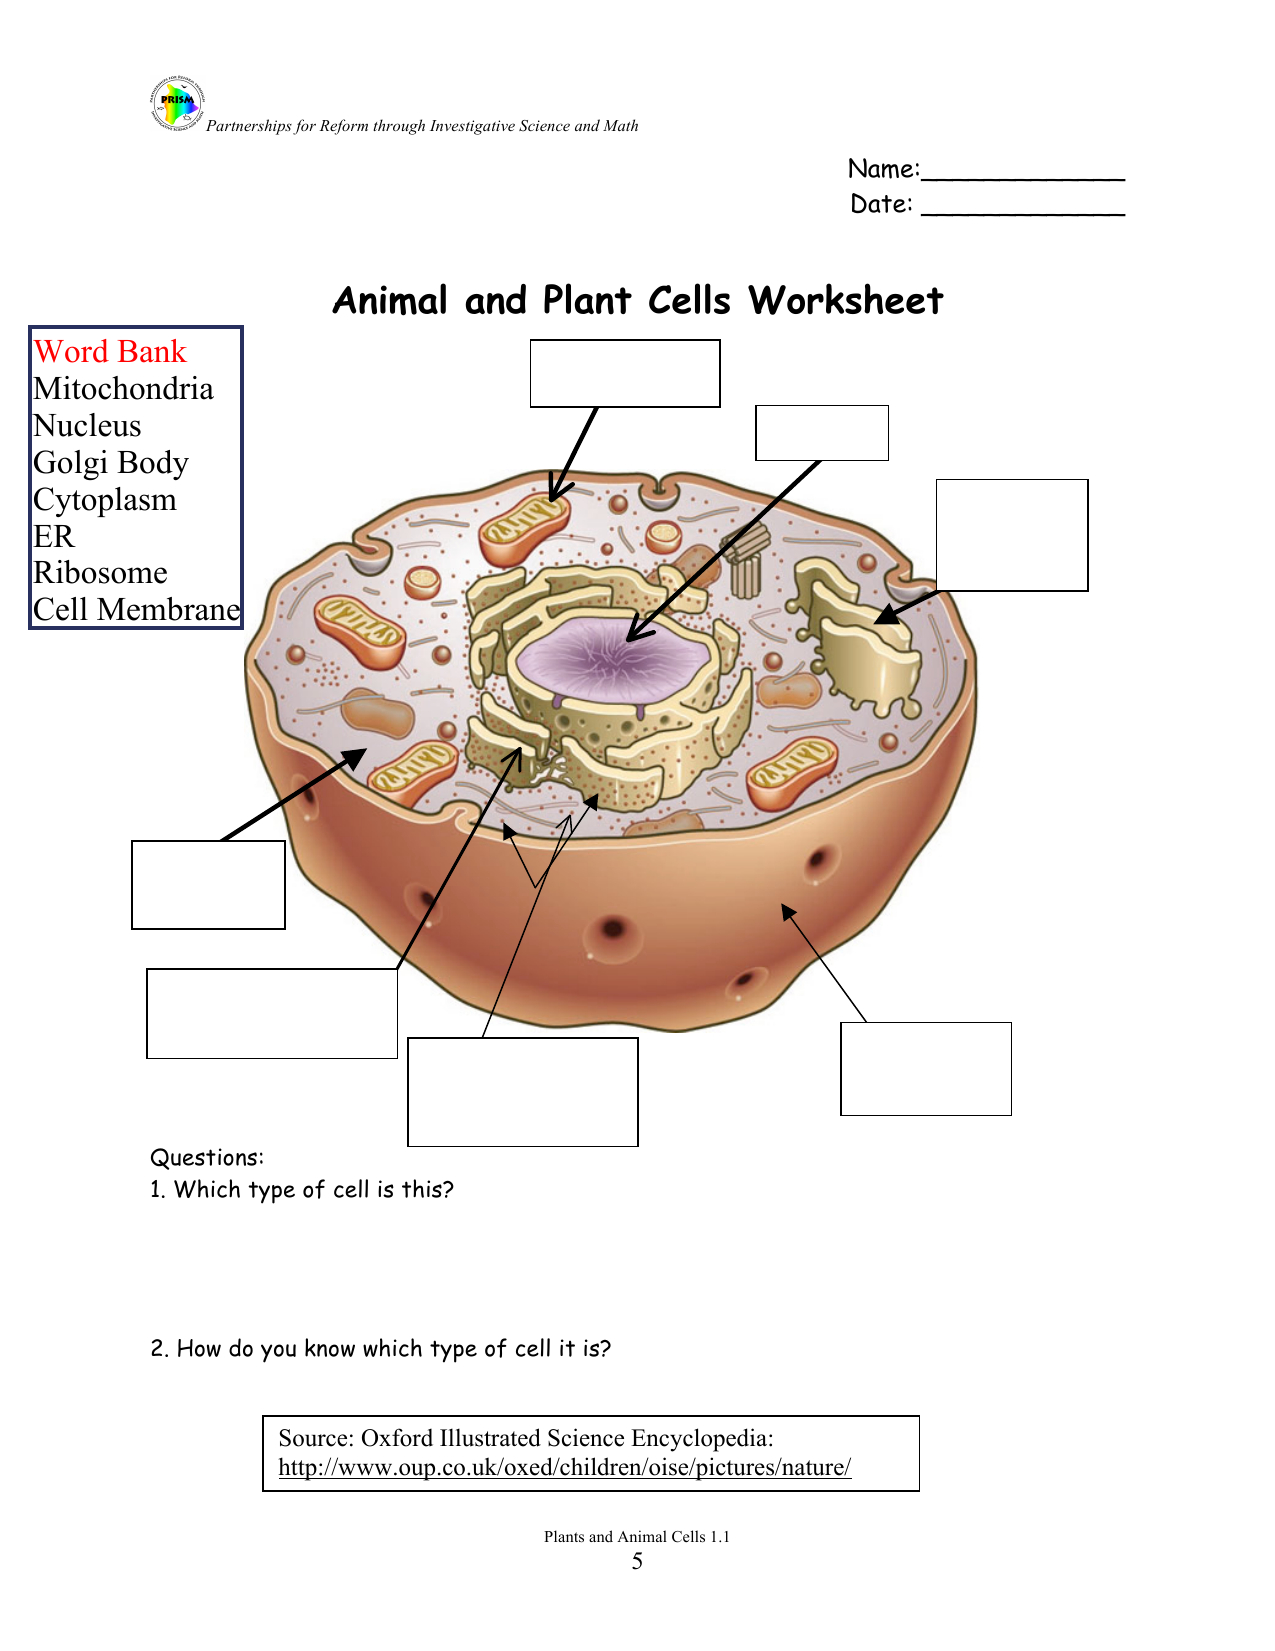 cells-alive-meiosis-phase-worksheet-answers-the-cell-cycle-worksheet-answer-key